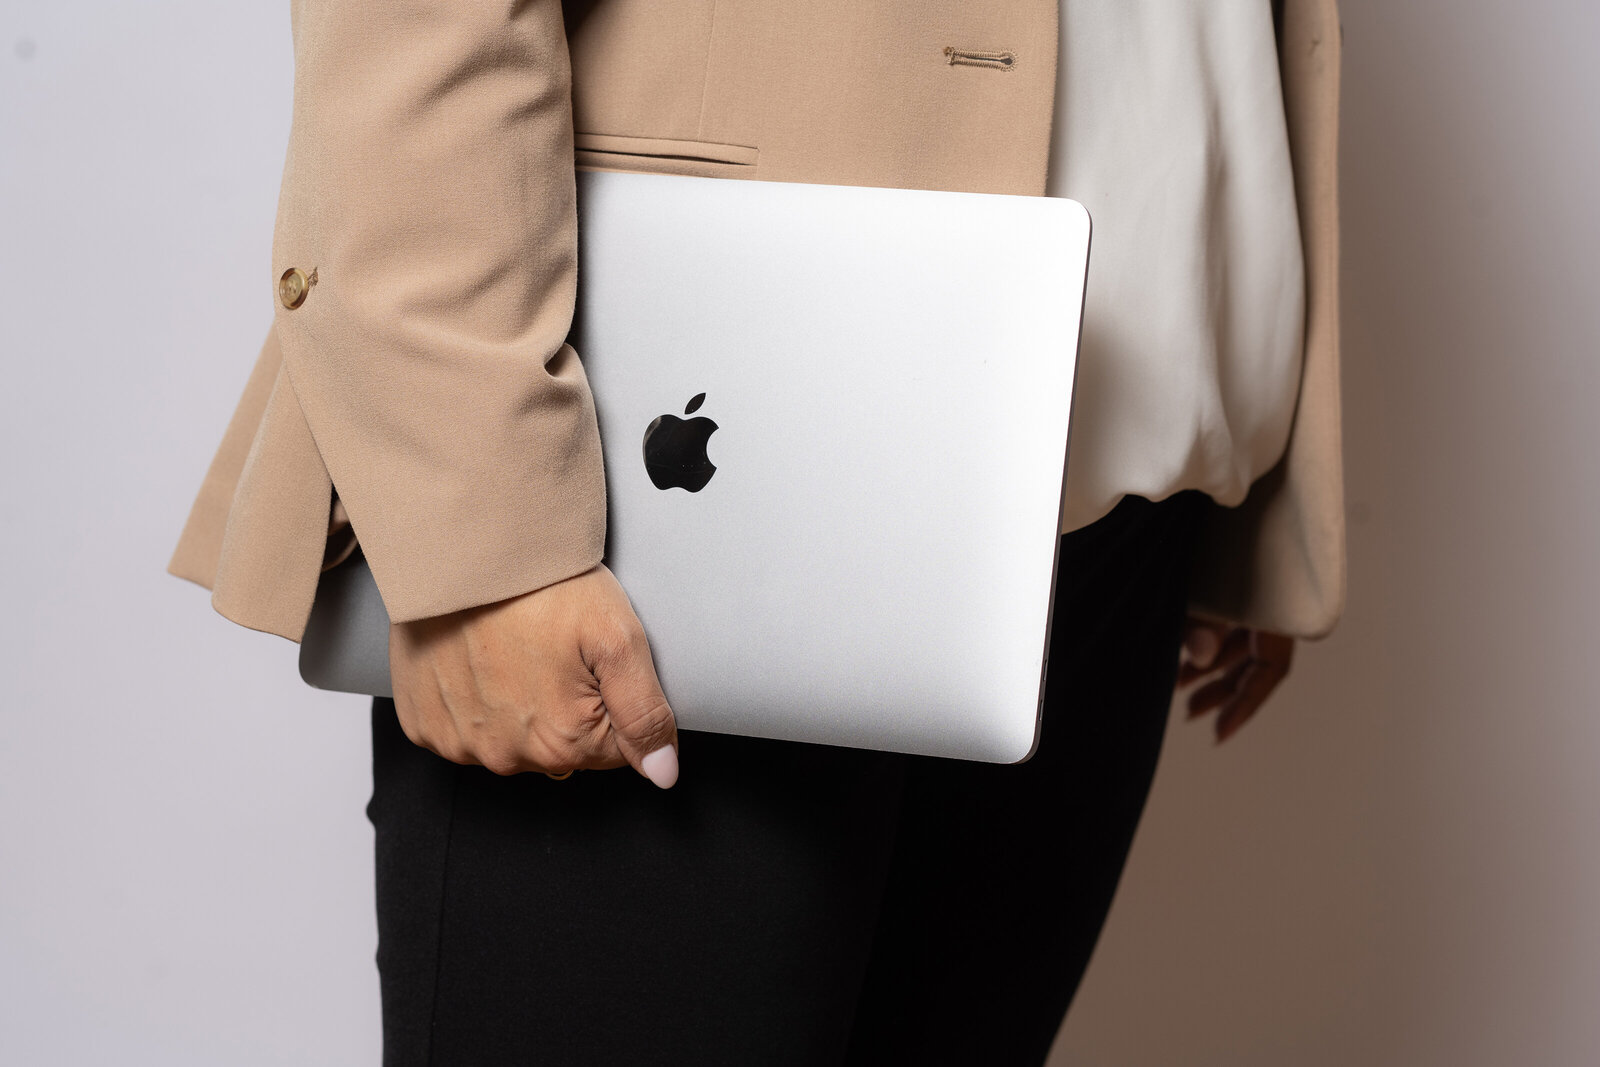 The expertise of a business consultant, adorned in an elegant blazer and equipped with a laptop